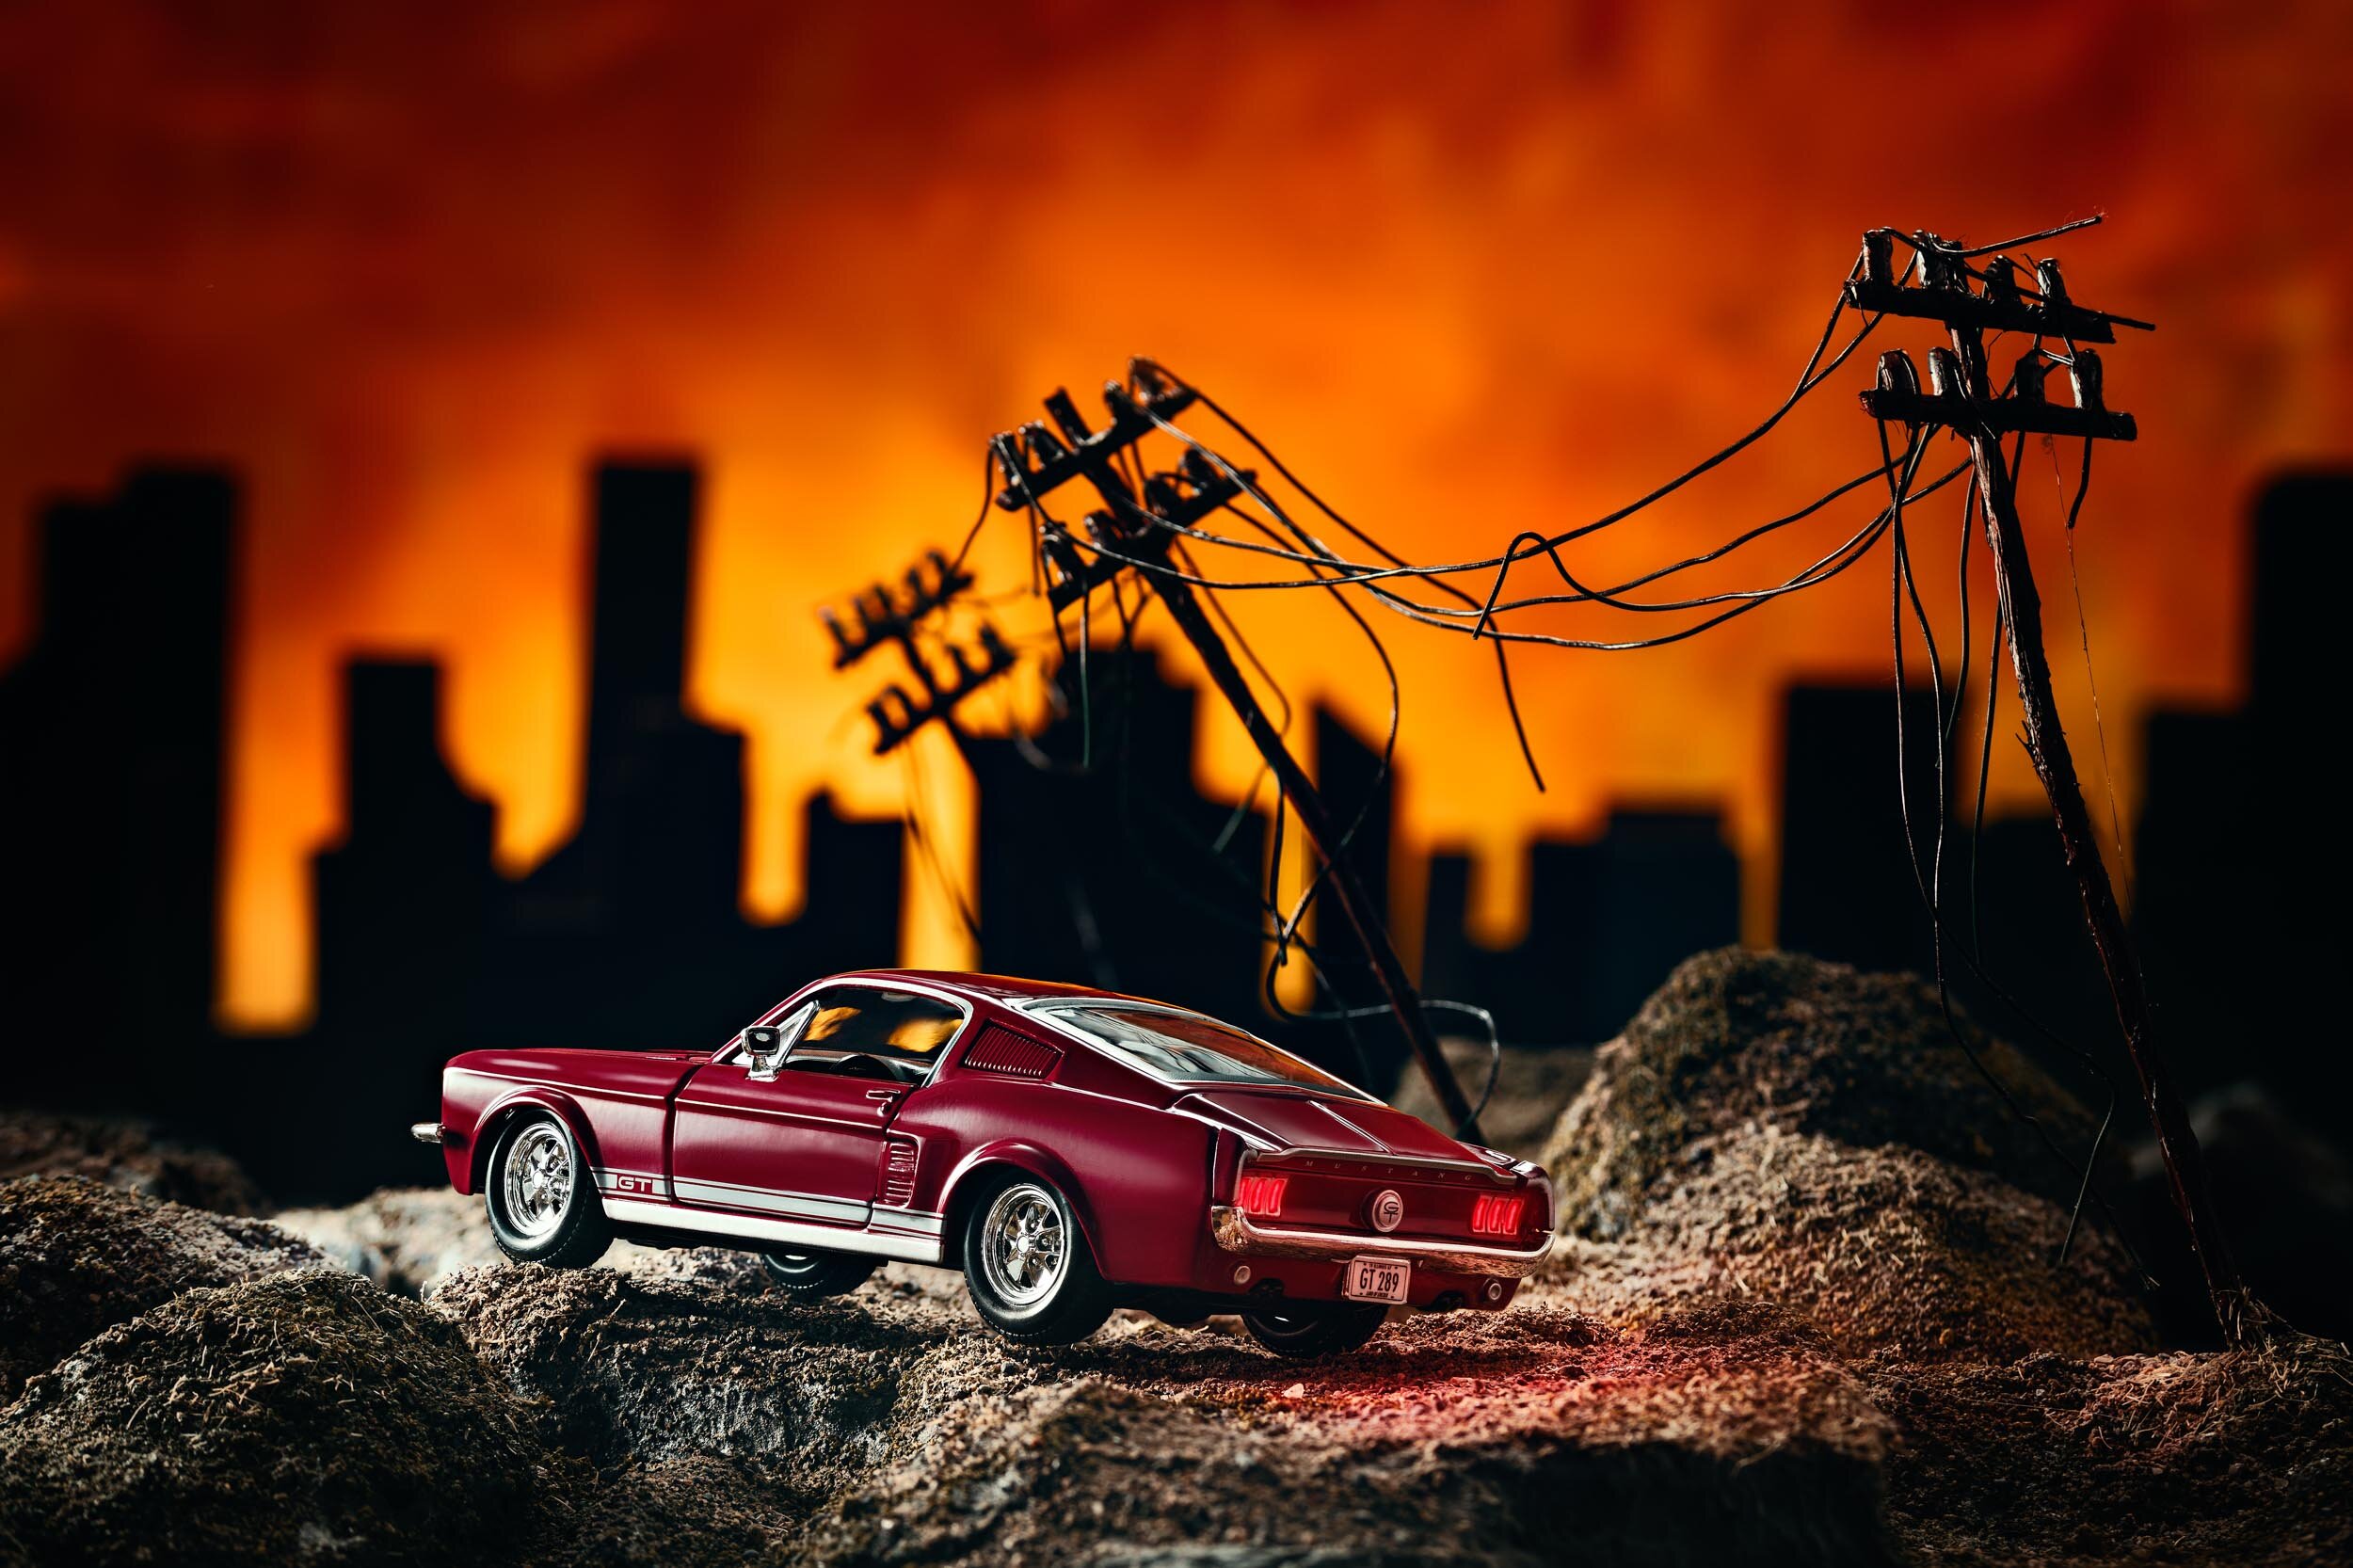 Red Mustang | Miniature Worlds Project